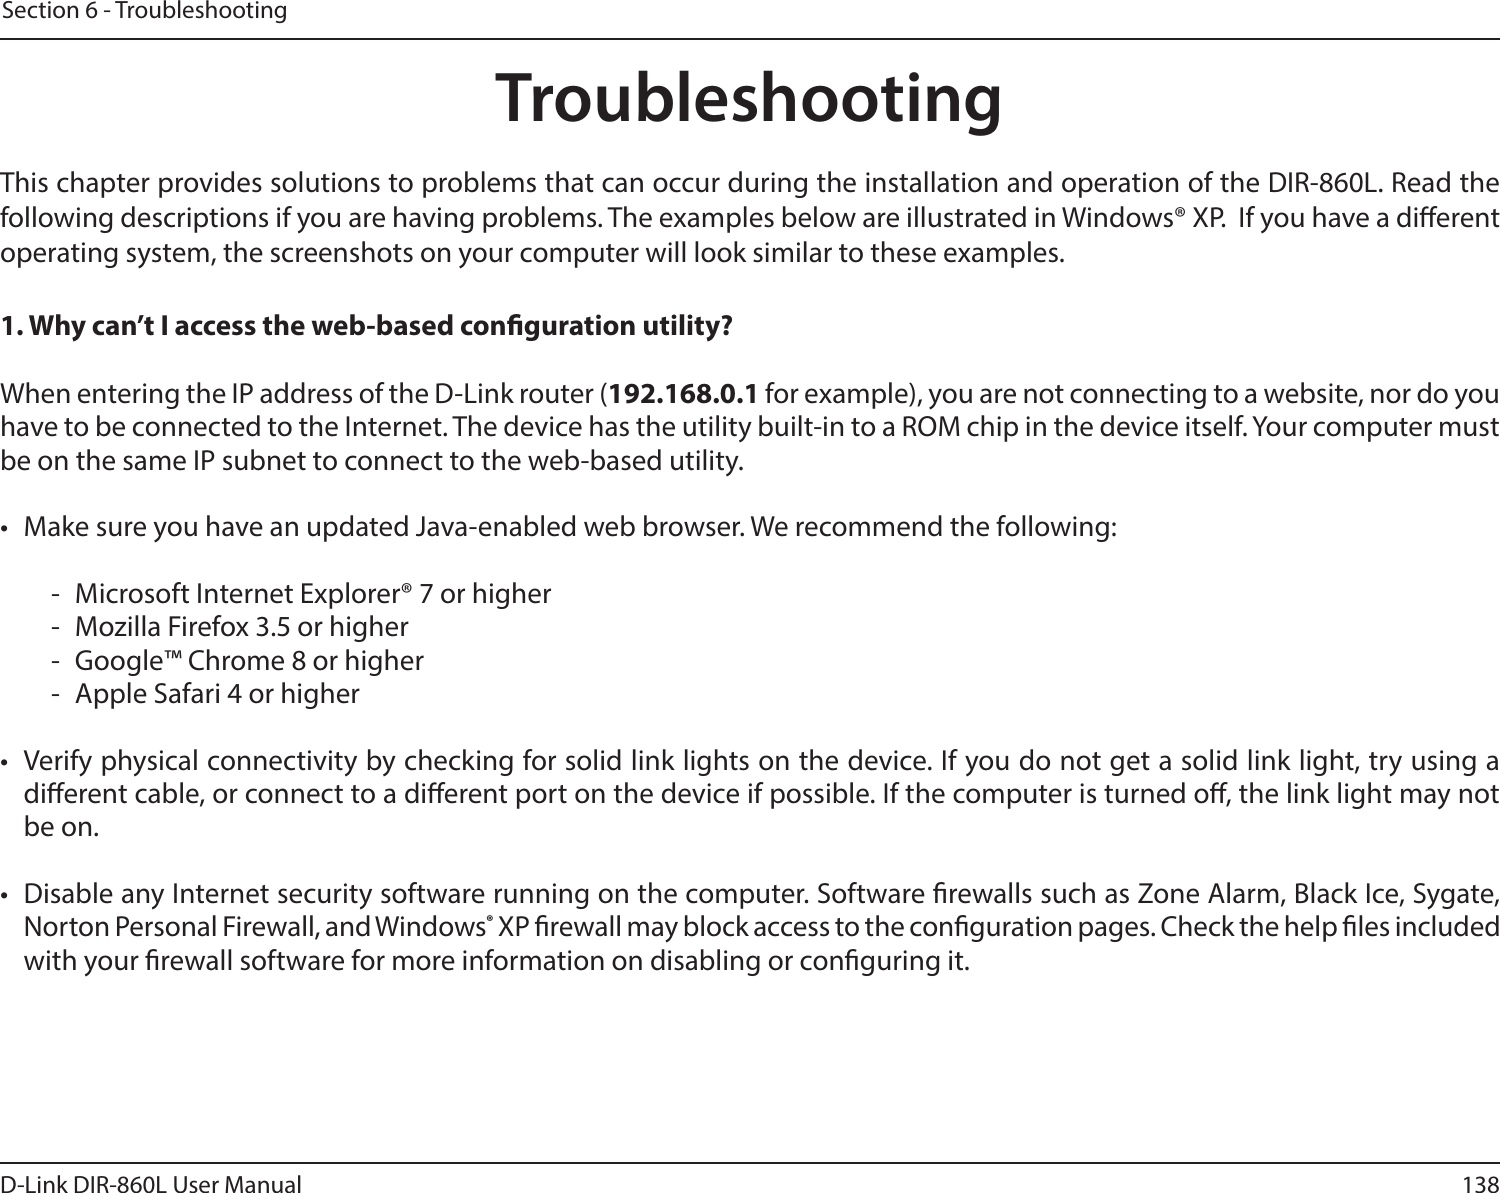 138D-Link DIR-860L User ManualSection 6 - TroubleshootingTroubleshootingThis chapter provides solutions to problems that can occur during the installation and operation of the DIR-860L. Read the following descriptions if you are having problems. The examples below are illustrated in Windows® XP.  If you have a dierent operating system, the screenshots on your computer will look similar to these examples.1. Why can’t I access the web-based conguration utility?When entering the IP address of the D-Link router (192.168.0.1 for example), you are not connecting to a website, nor do you have to be connected to the Internet. The device has the utility built-in to a ROM chip in the device itself. Your computer must be on the same IP subnet to connect to the web-based utility. •  Make sure you have an updated Java-enabled web browser. We recommend the following:  -  Microsoft Internet Explorer® 7 or higher-  Mozilla Firefox 3.5 or higher-  Google™ Chrome 8 or higher-  Apple Safari 4 or higher•  Verify physical connectivity by checking for solid link lights on the device. If you do not get a solid link light, try using a dierent cable, or connect to a dierent port on the device if possible. If the computer is turned o, the link light may not be on.•  Disable any Internet security software running on the computer. Software rewalls such as Zone Alarm, Black Ice, Sygate, Norton Personal Firewall, and Windows® XP rewall may block access to the conguration pages. Check the help les included with your rewall software for more information on disabling or conguring it.